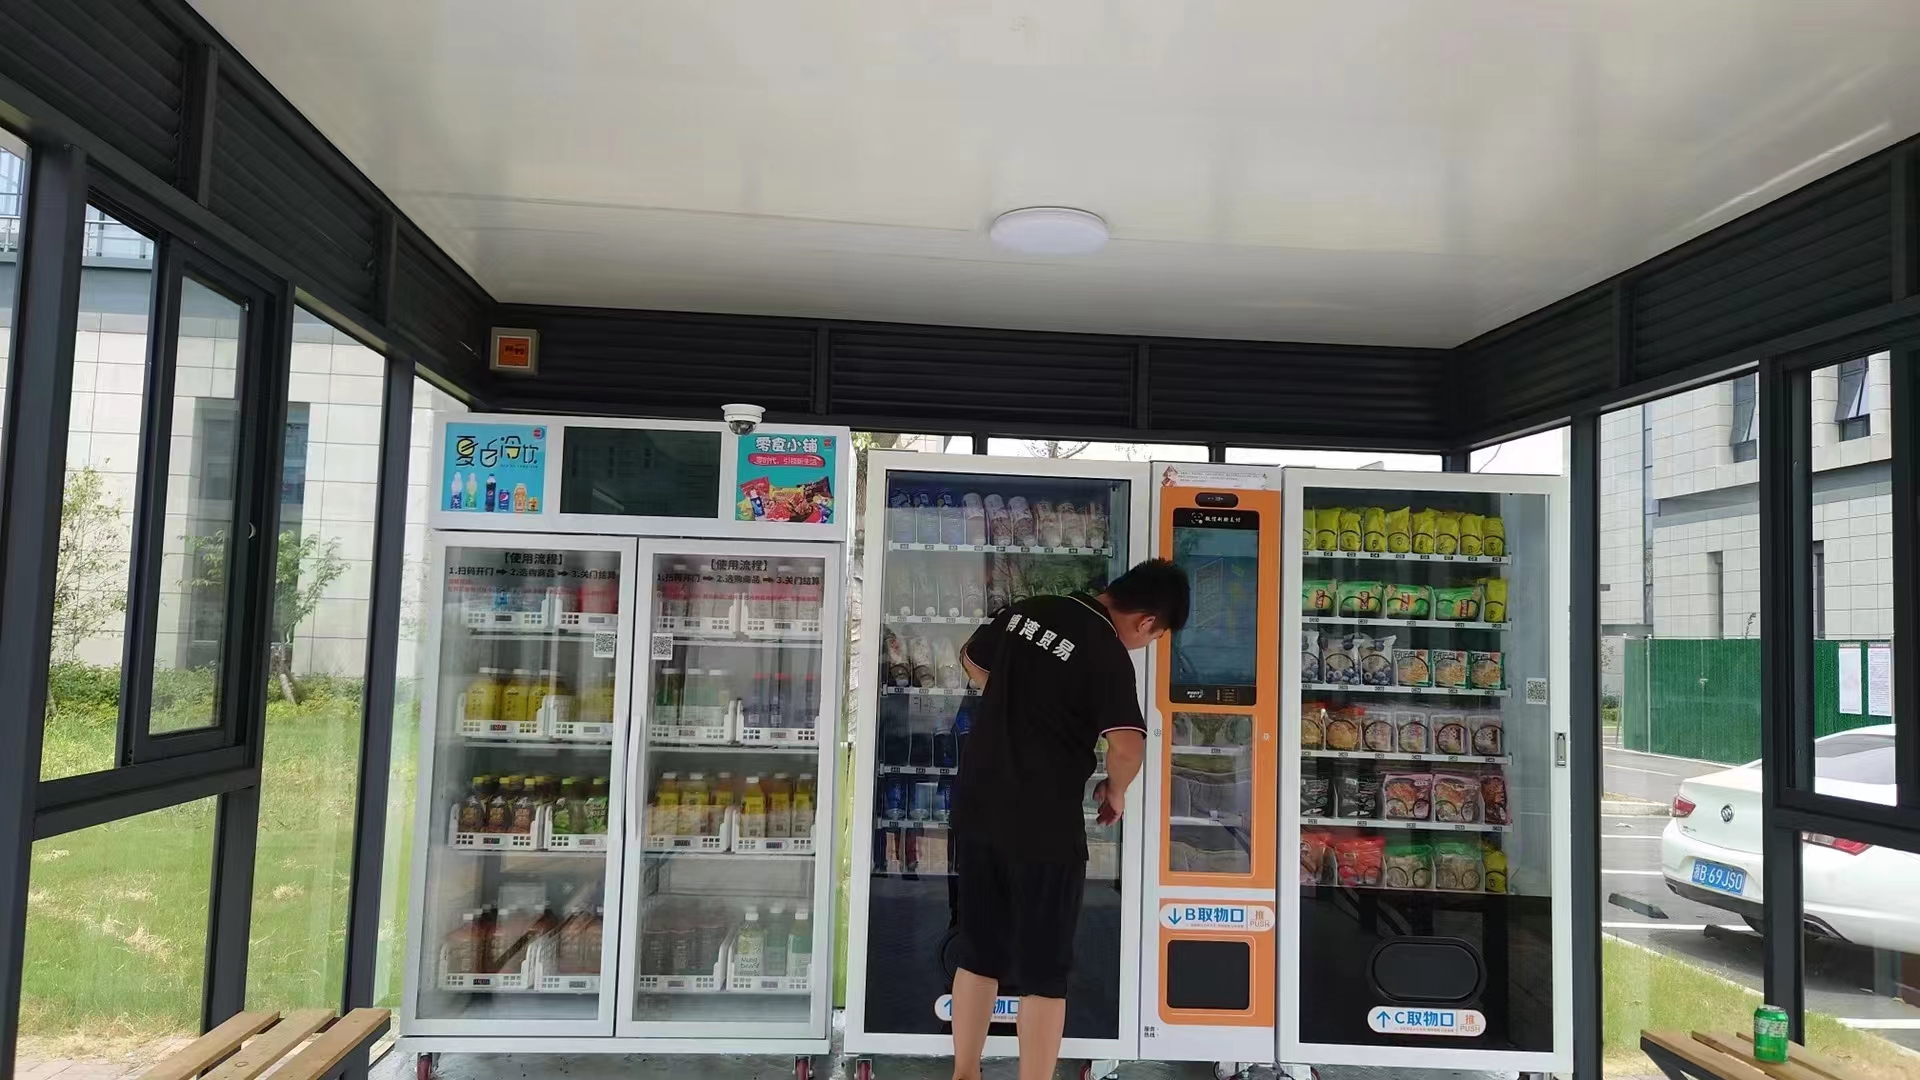 China: Snack dirnk vending machine in the Central Park